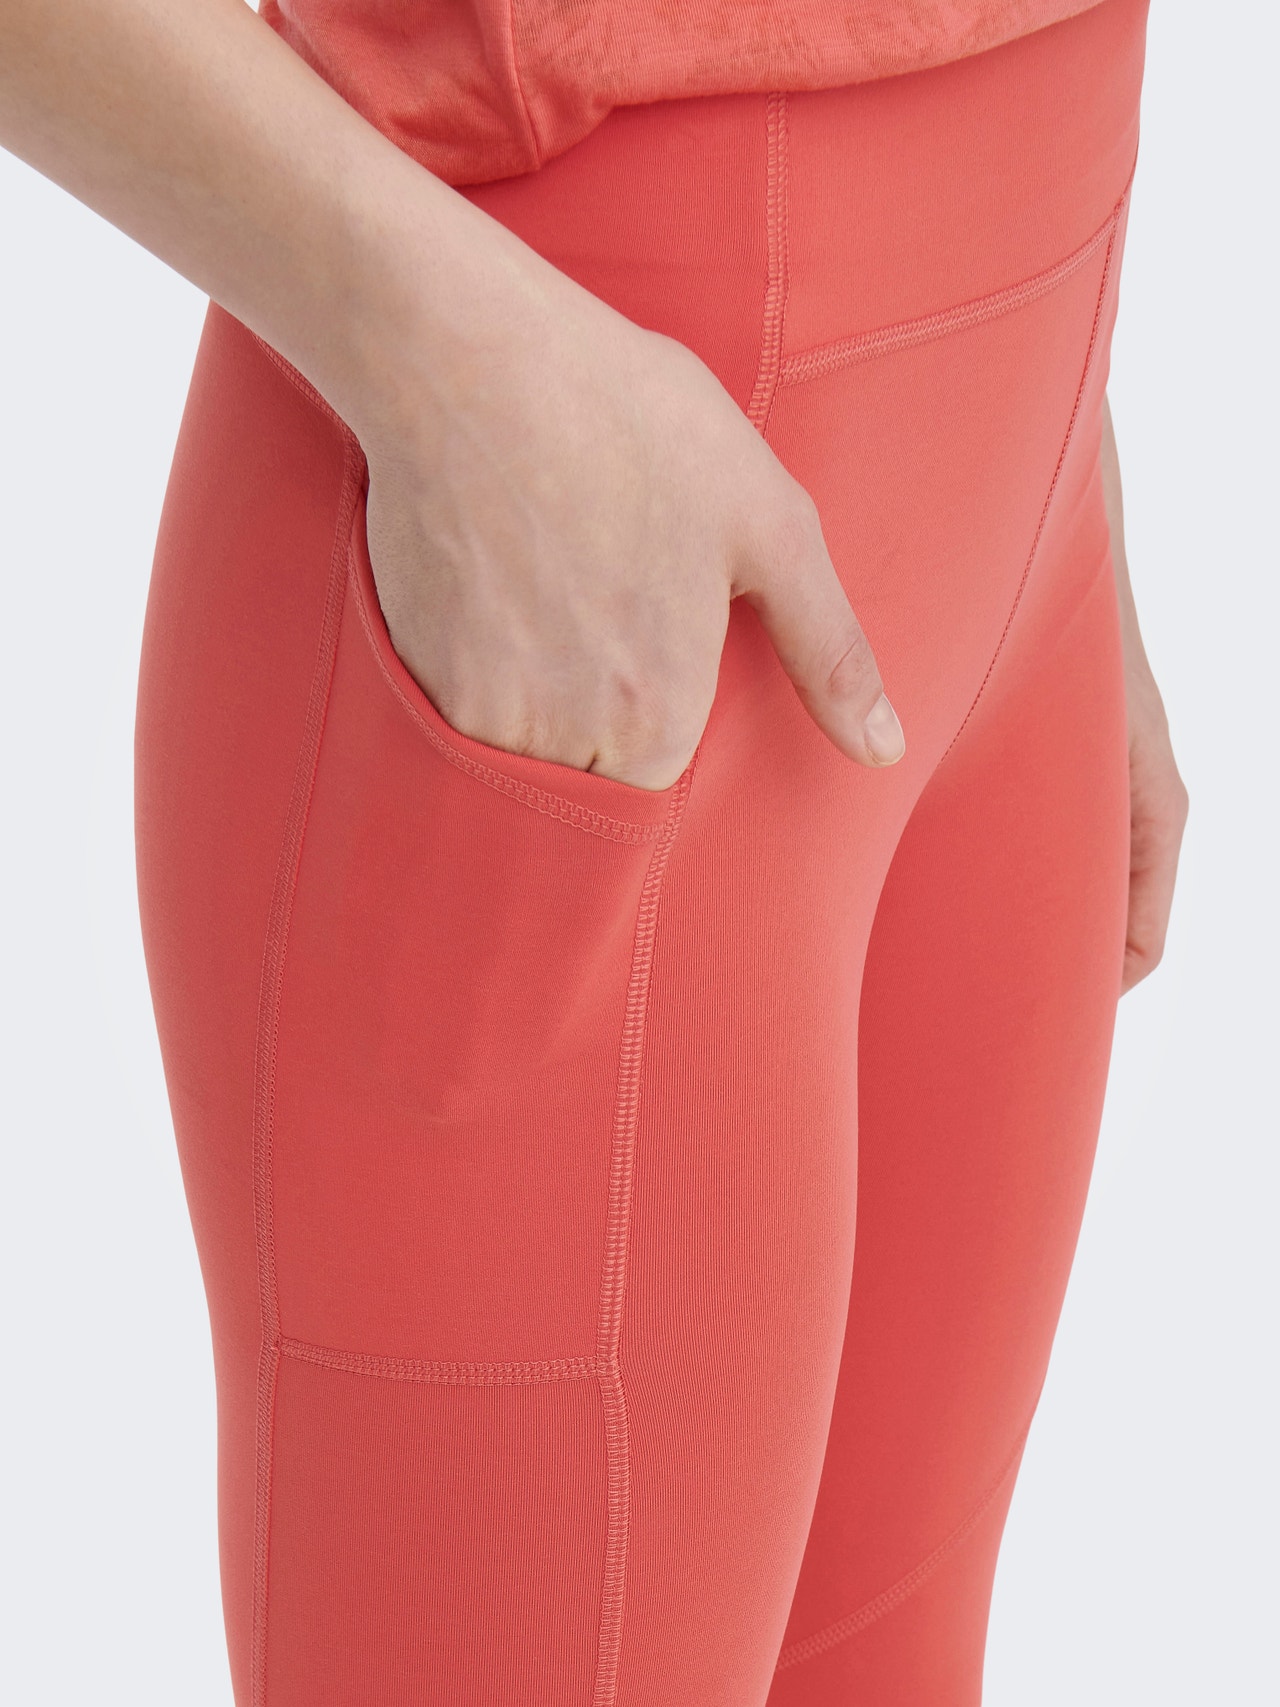 Patterend Training Tights with 40% discount!